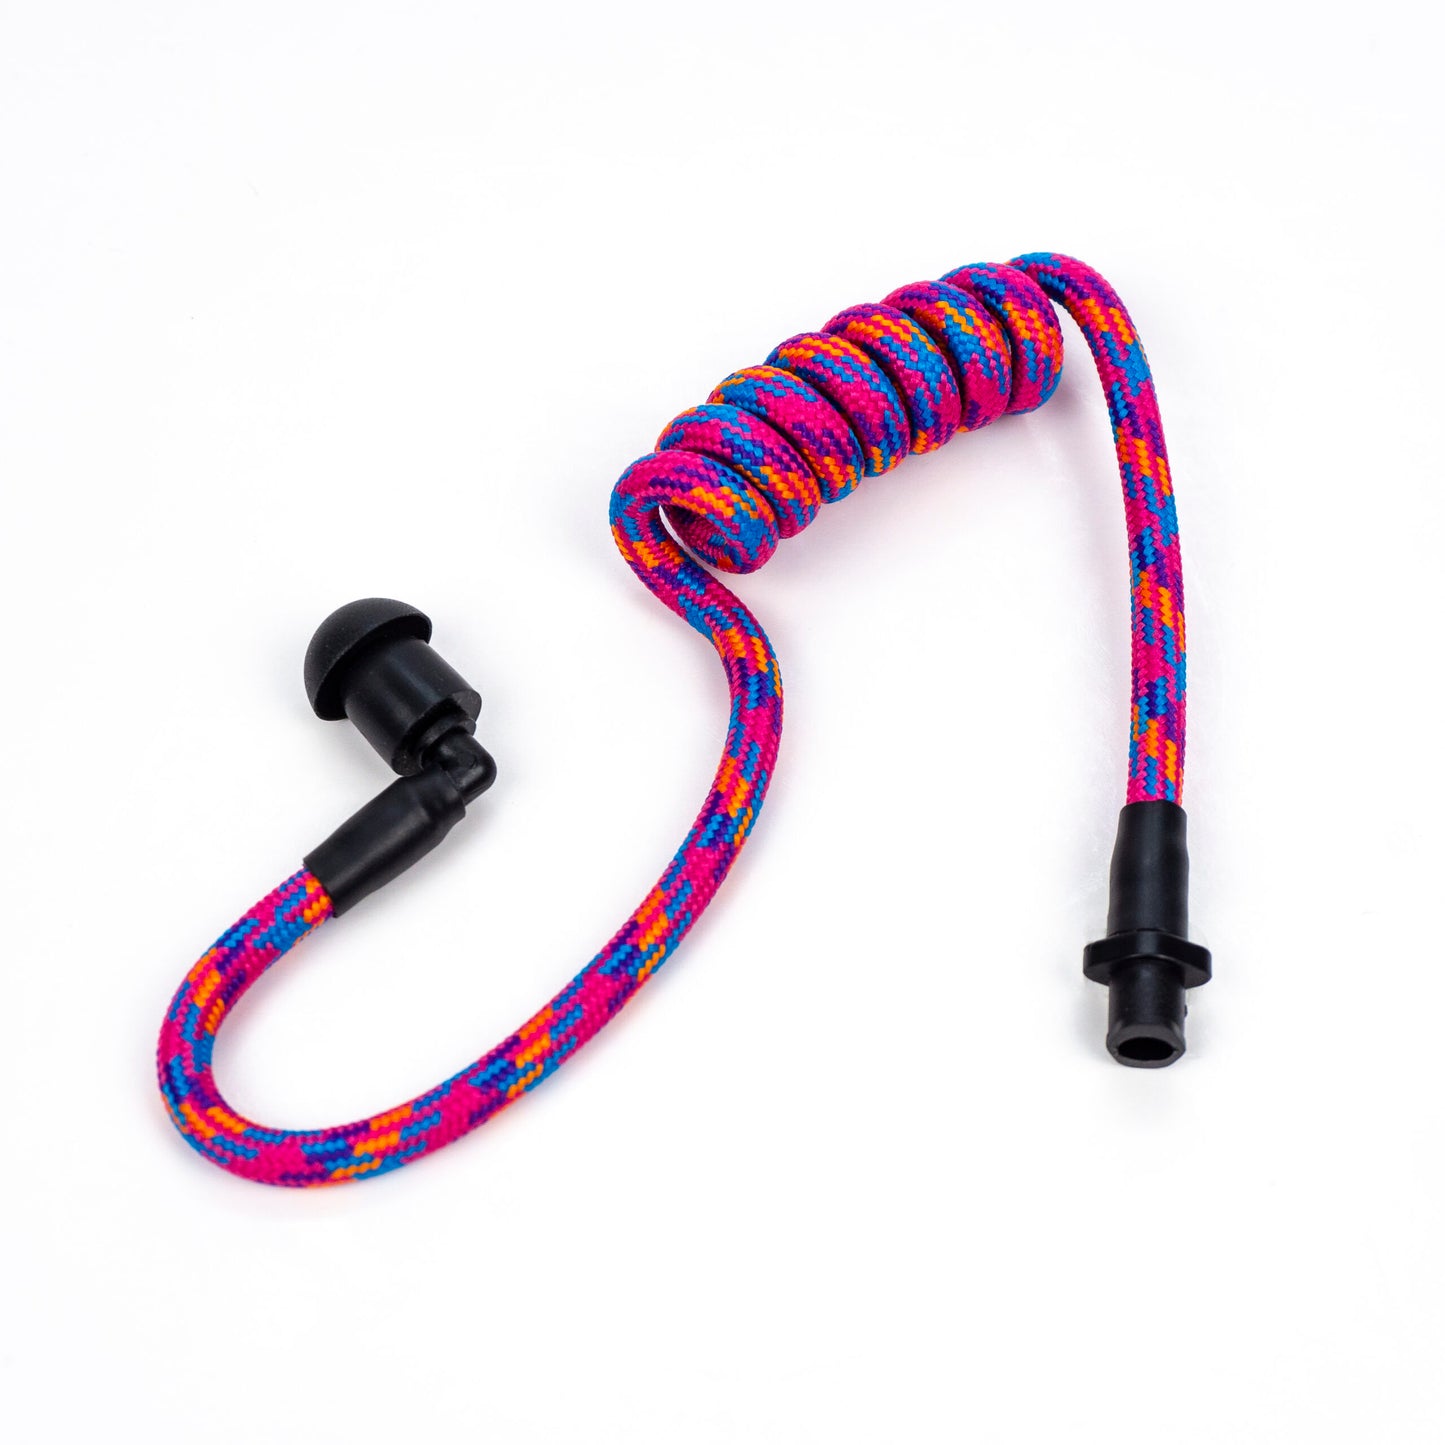 Earpiece "Tubeez" for Walkie Headsets - Many Colors!